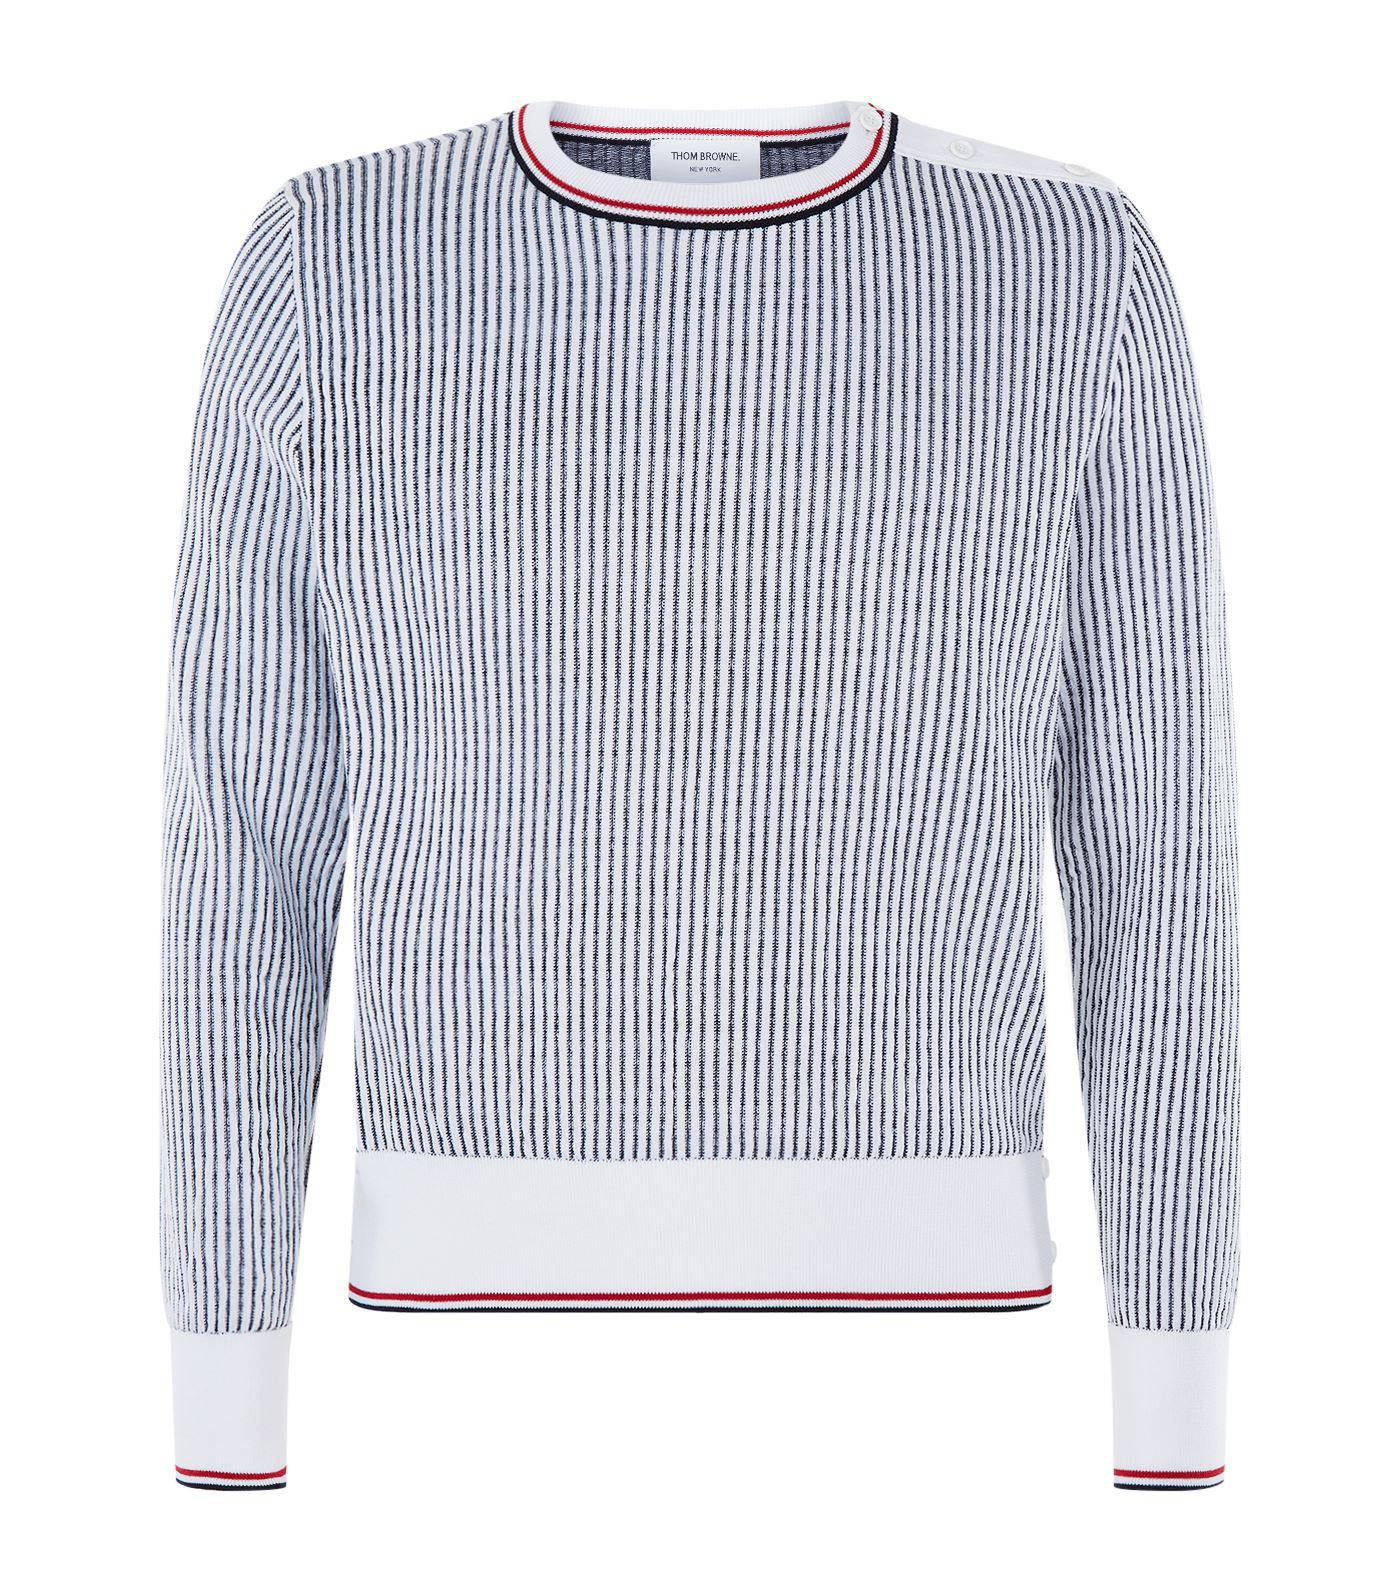 Thom Browne Cotton Striped Knit Sweater in Navy (Blue) for Men - Lyst